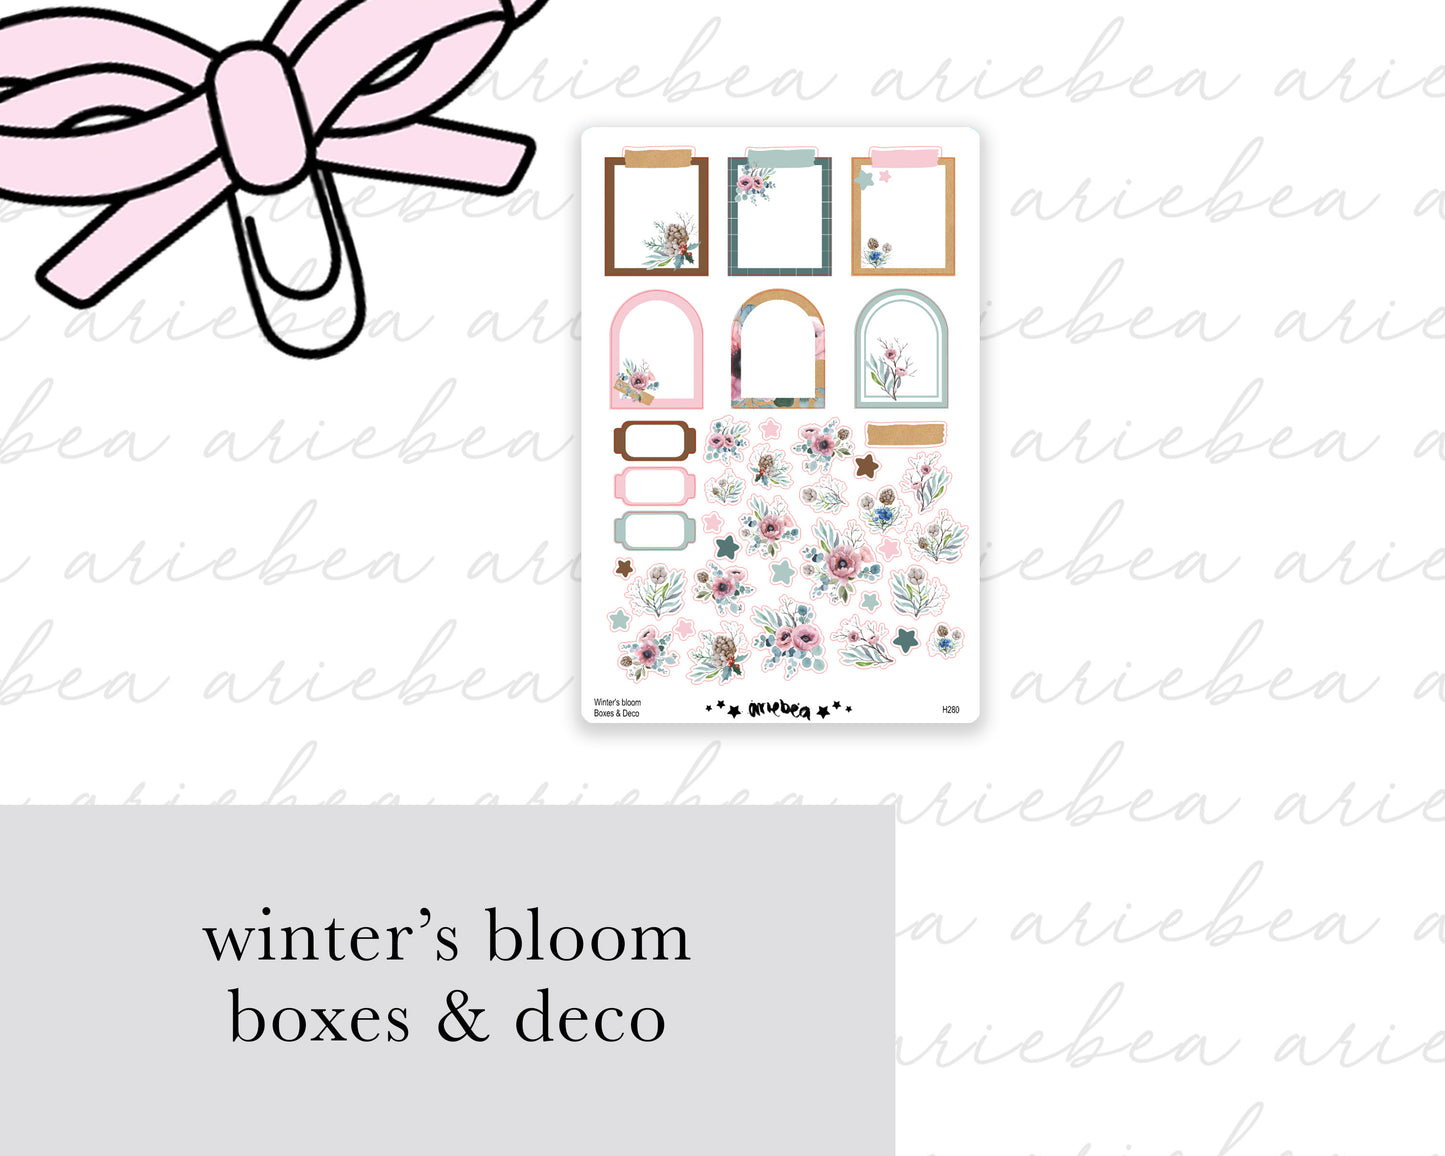 Winters Bloom Boxes & Deco